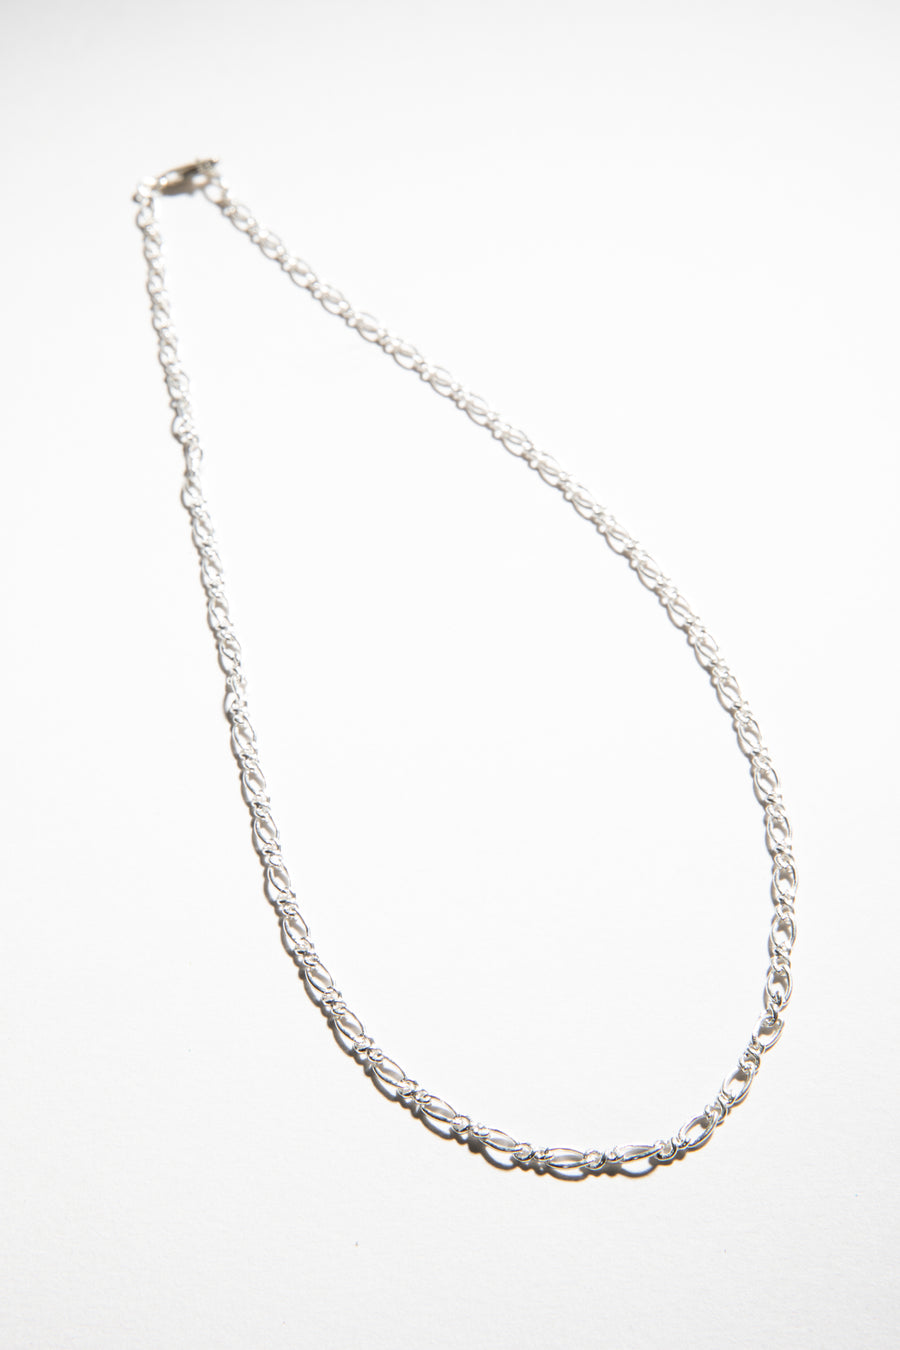 Cord Necklace · Mexicali Blues